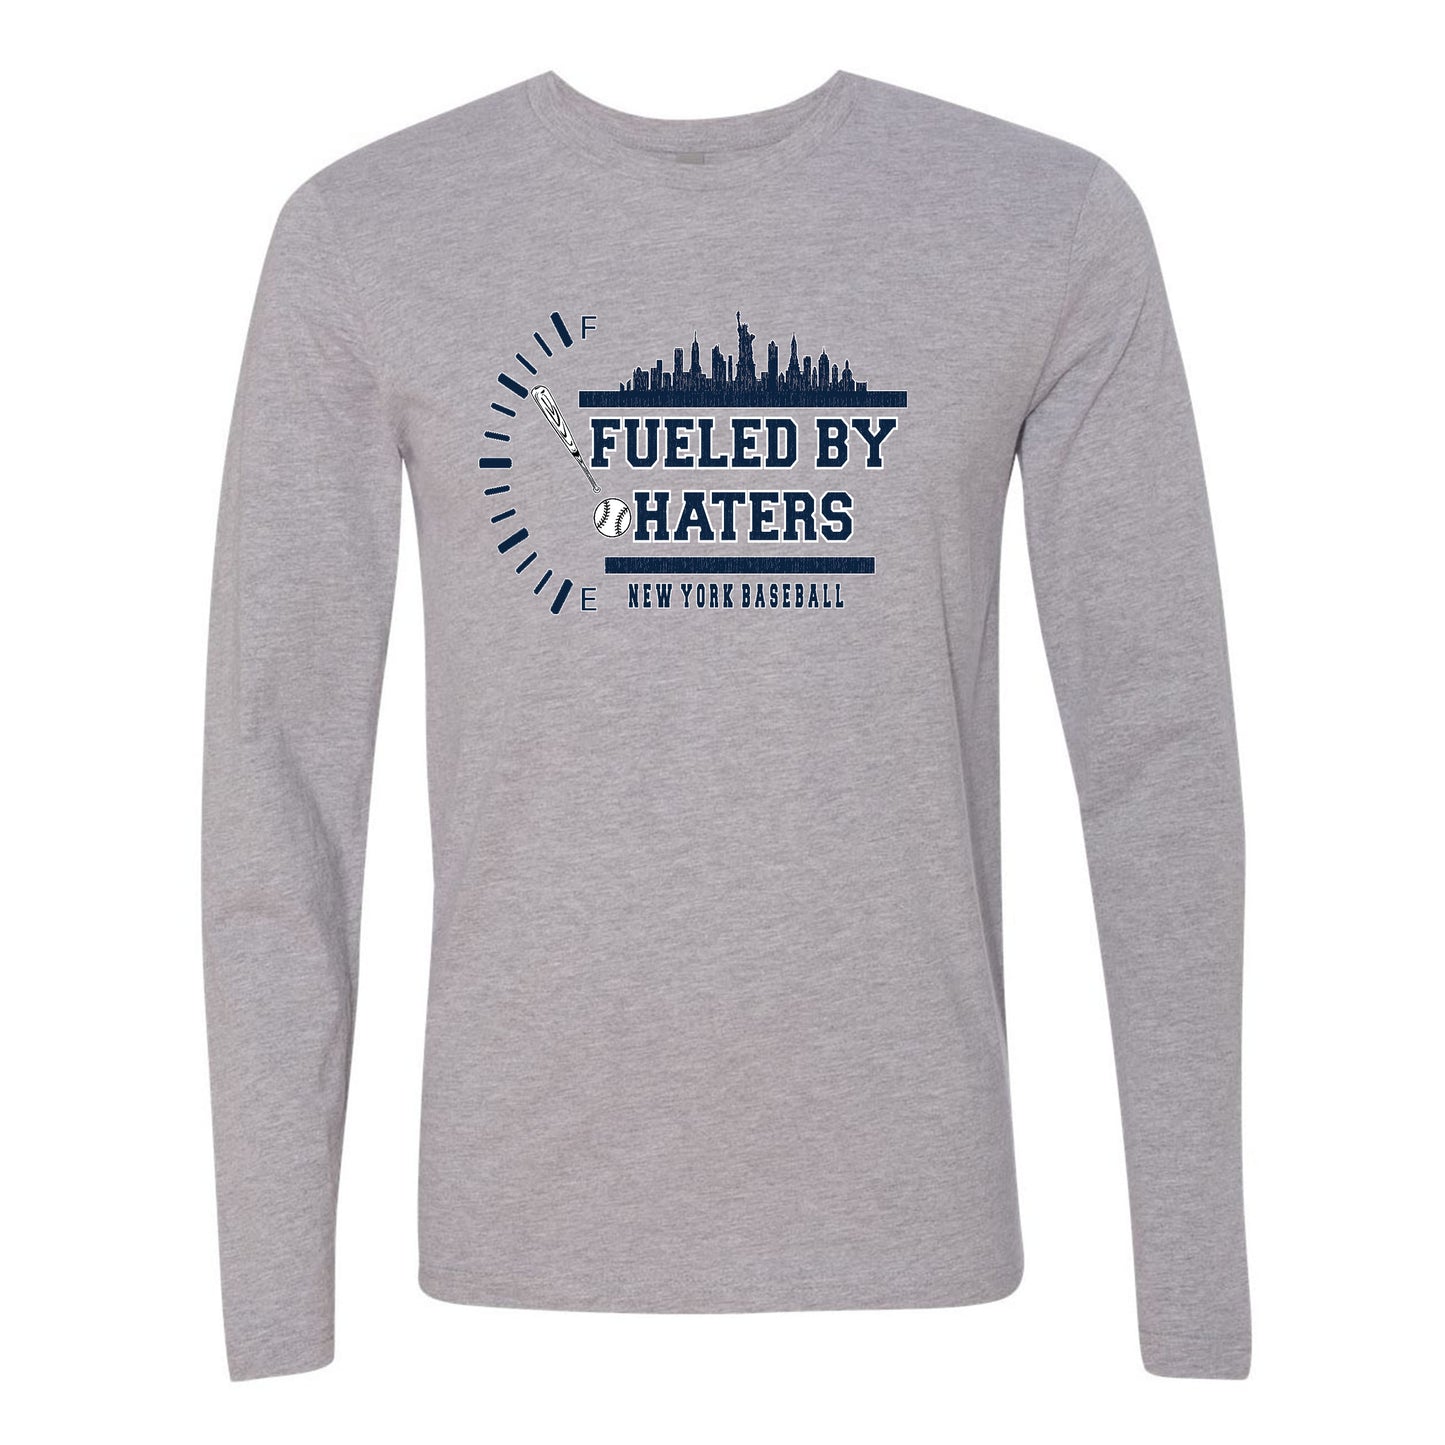 Fueled by Haters Apparel for New York Baseball Fans NYY